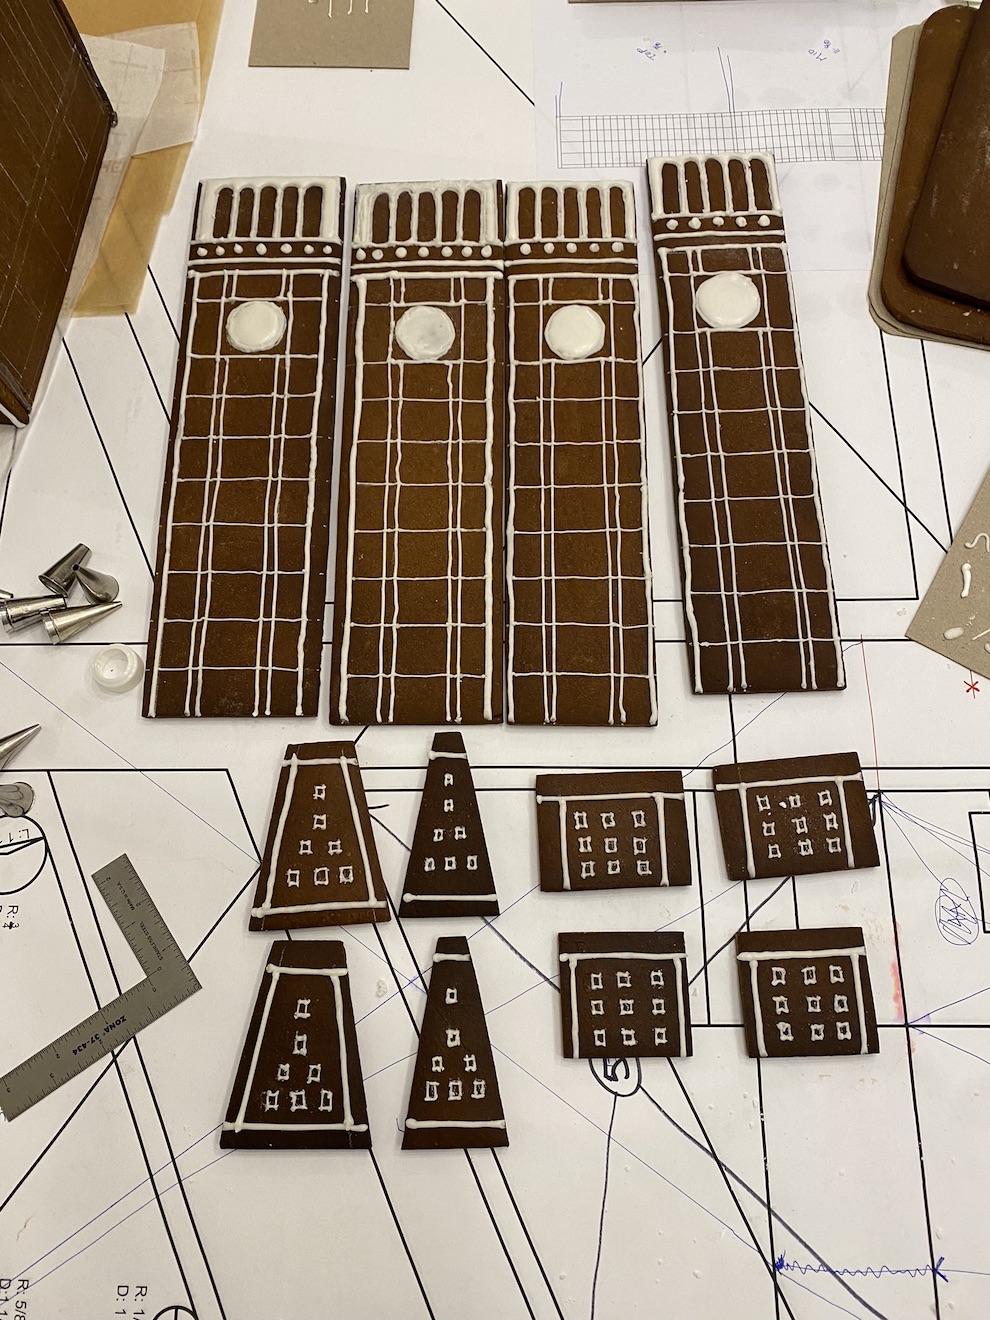 Elements of a gingerbread display showing the individual pieces of the clock tower in Madison Square Park.